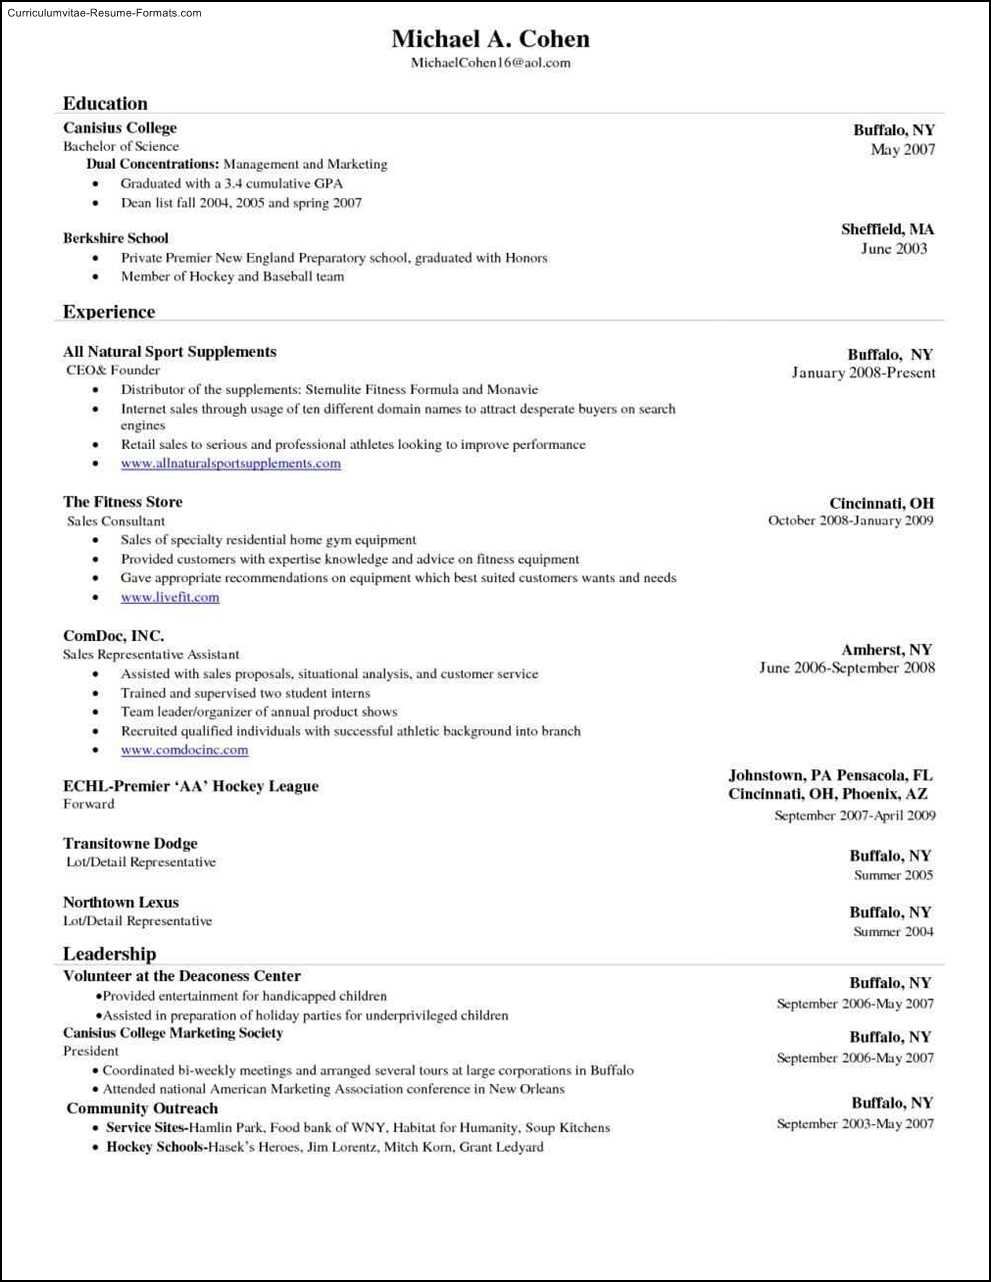 Resume Wizard In Ms Word | Professional Resumes Sample Online For Resume Templates Word 2010